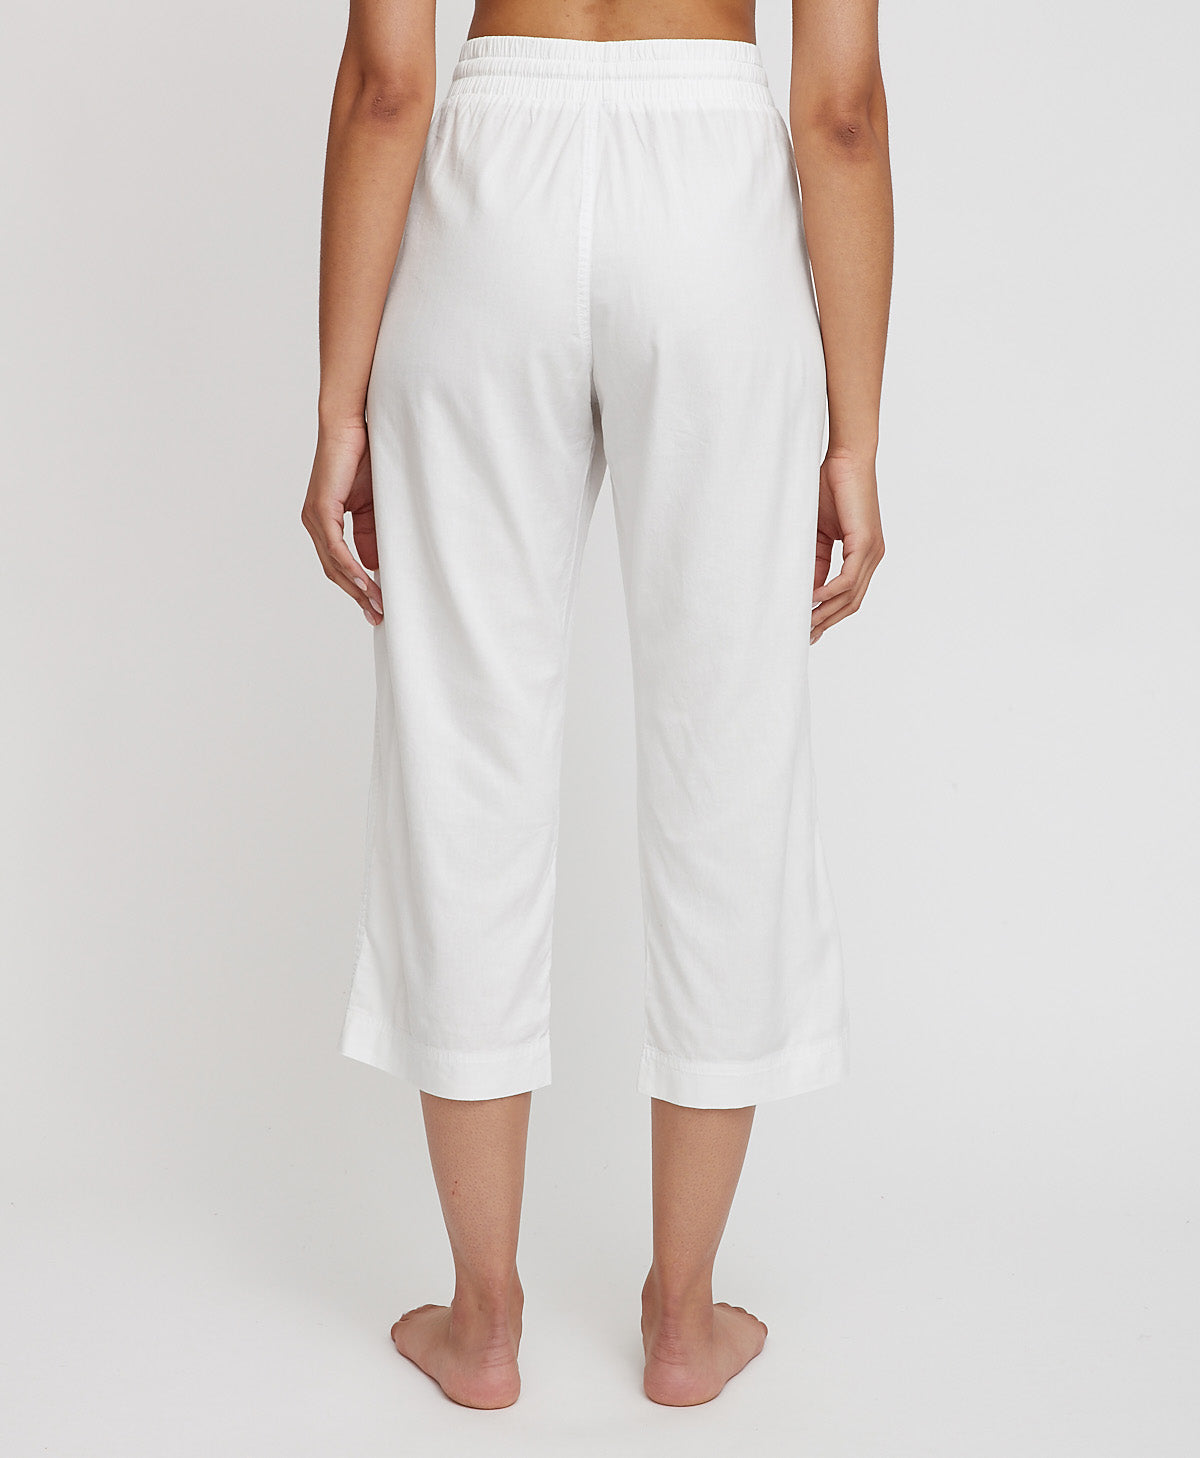 Buy Stylish Pant for Girls & Womens (White) at Amazon.in